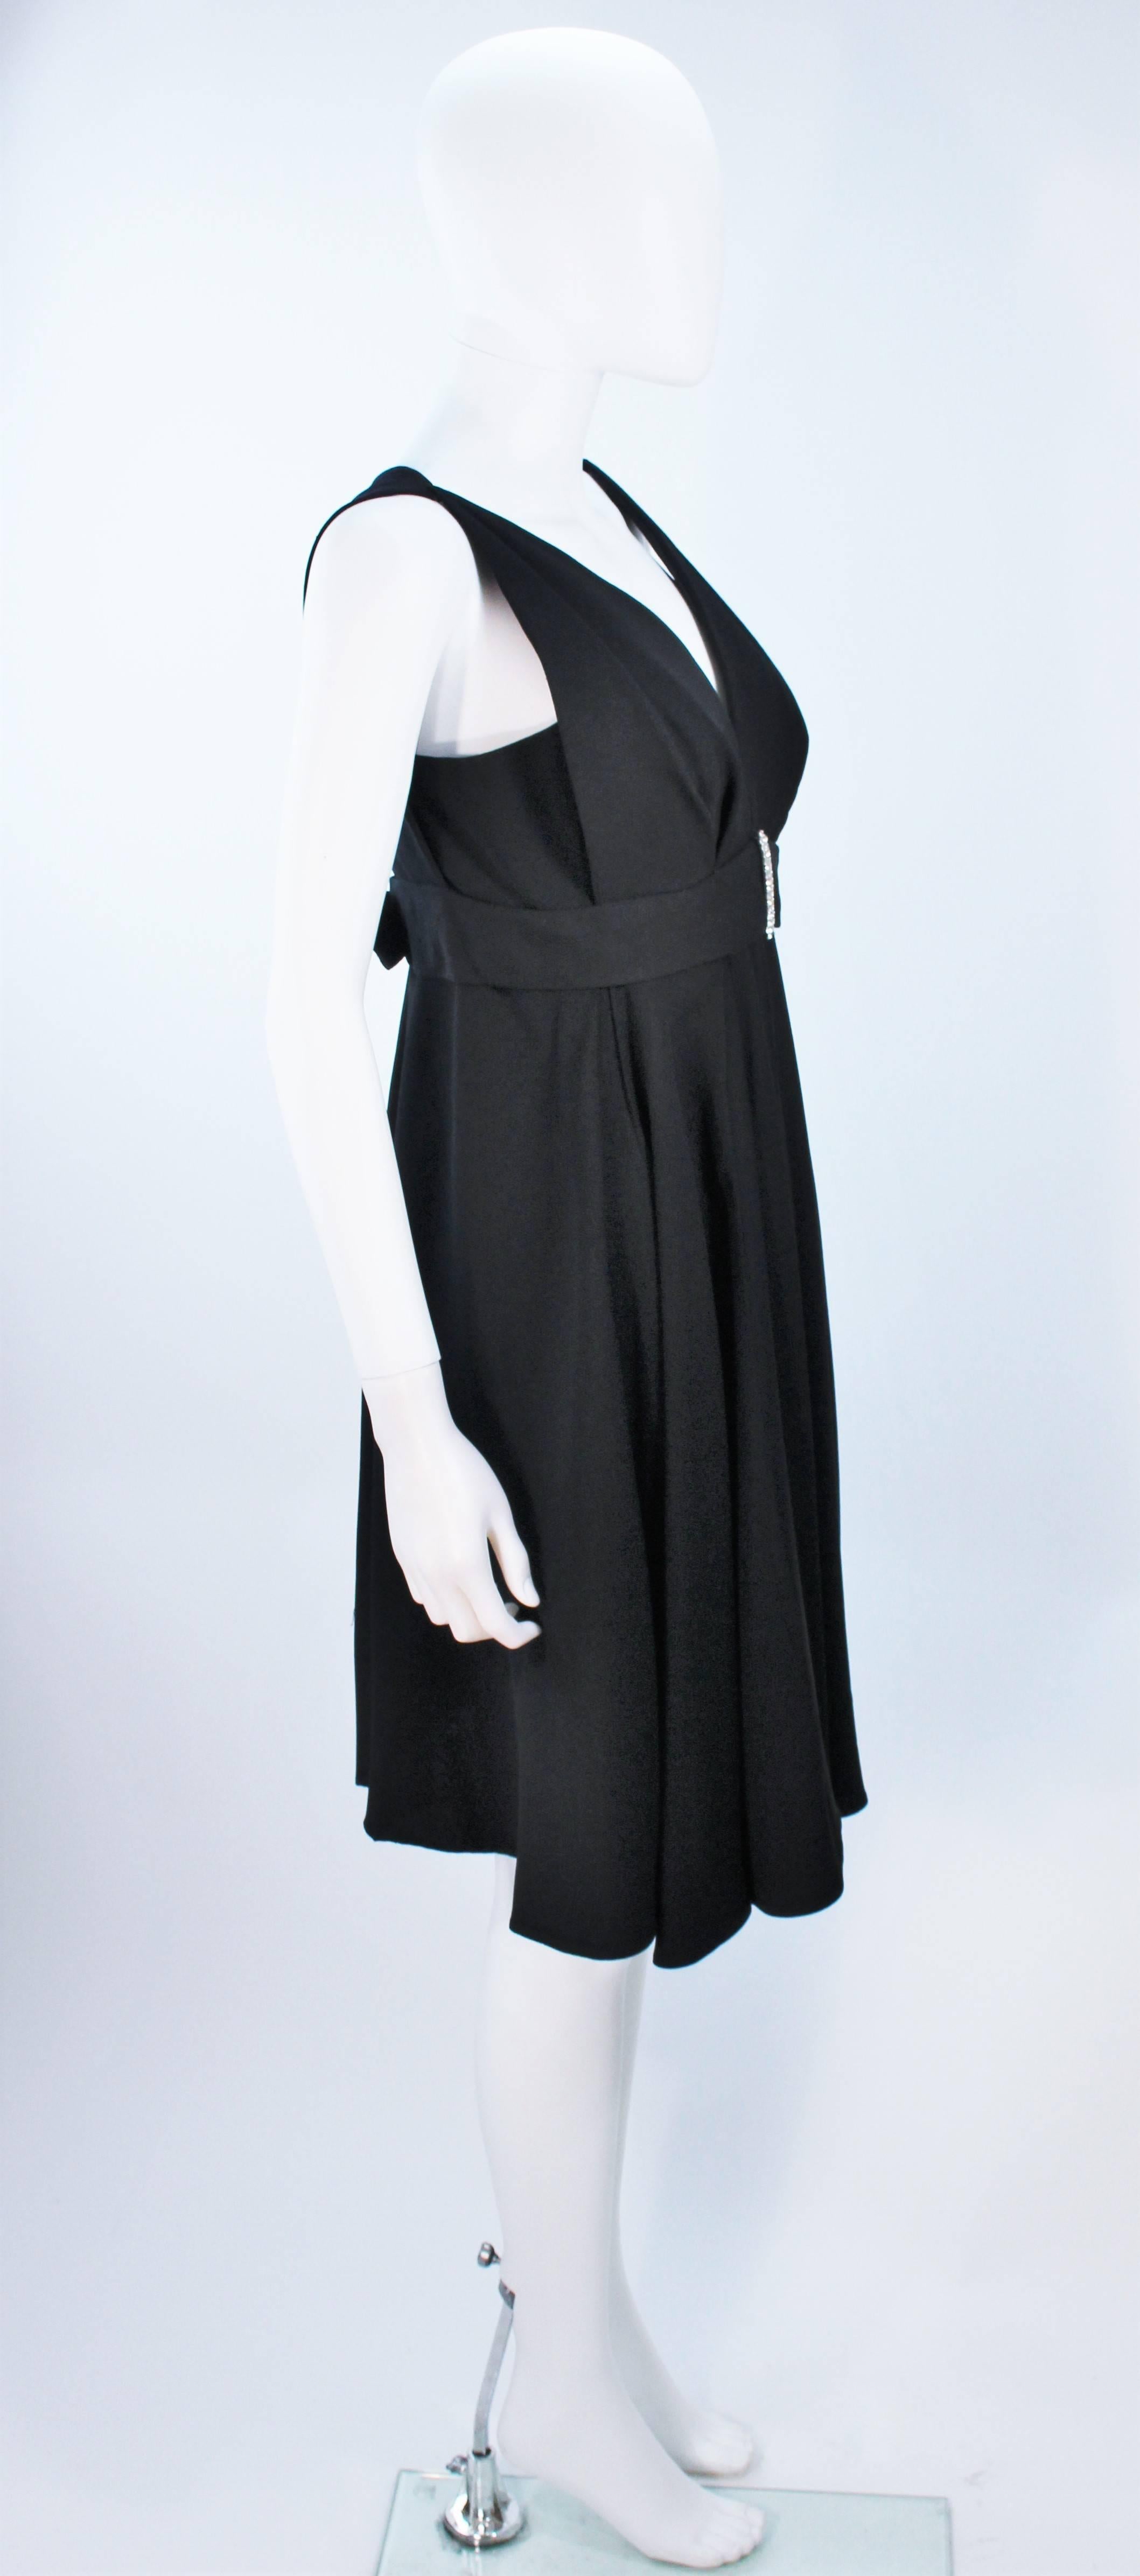 Women's 1960's Black Cocktail Dress with Rhinestone Bust Detail Size 6-8